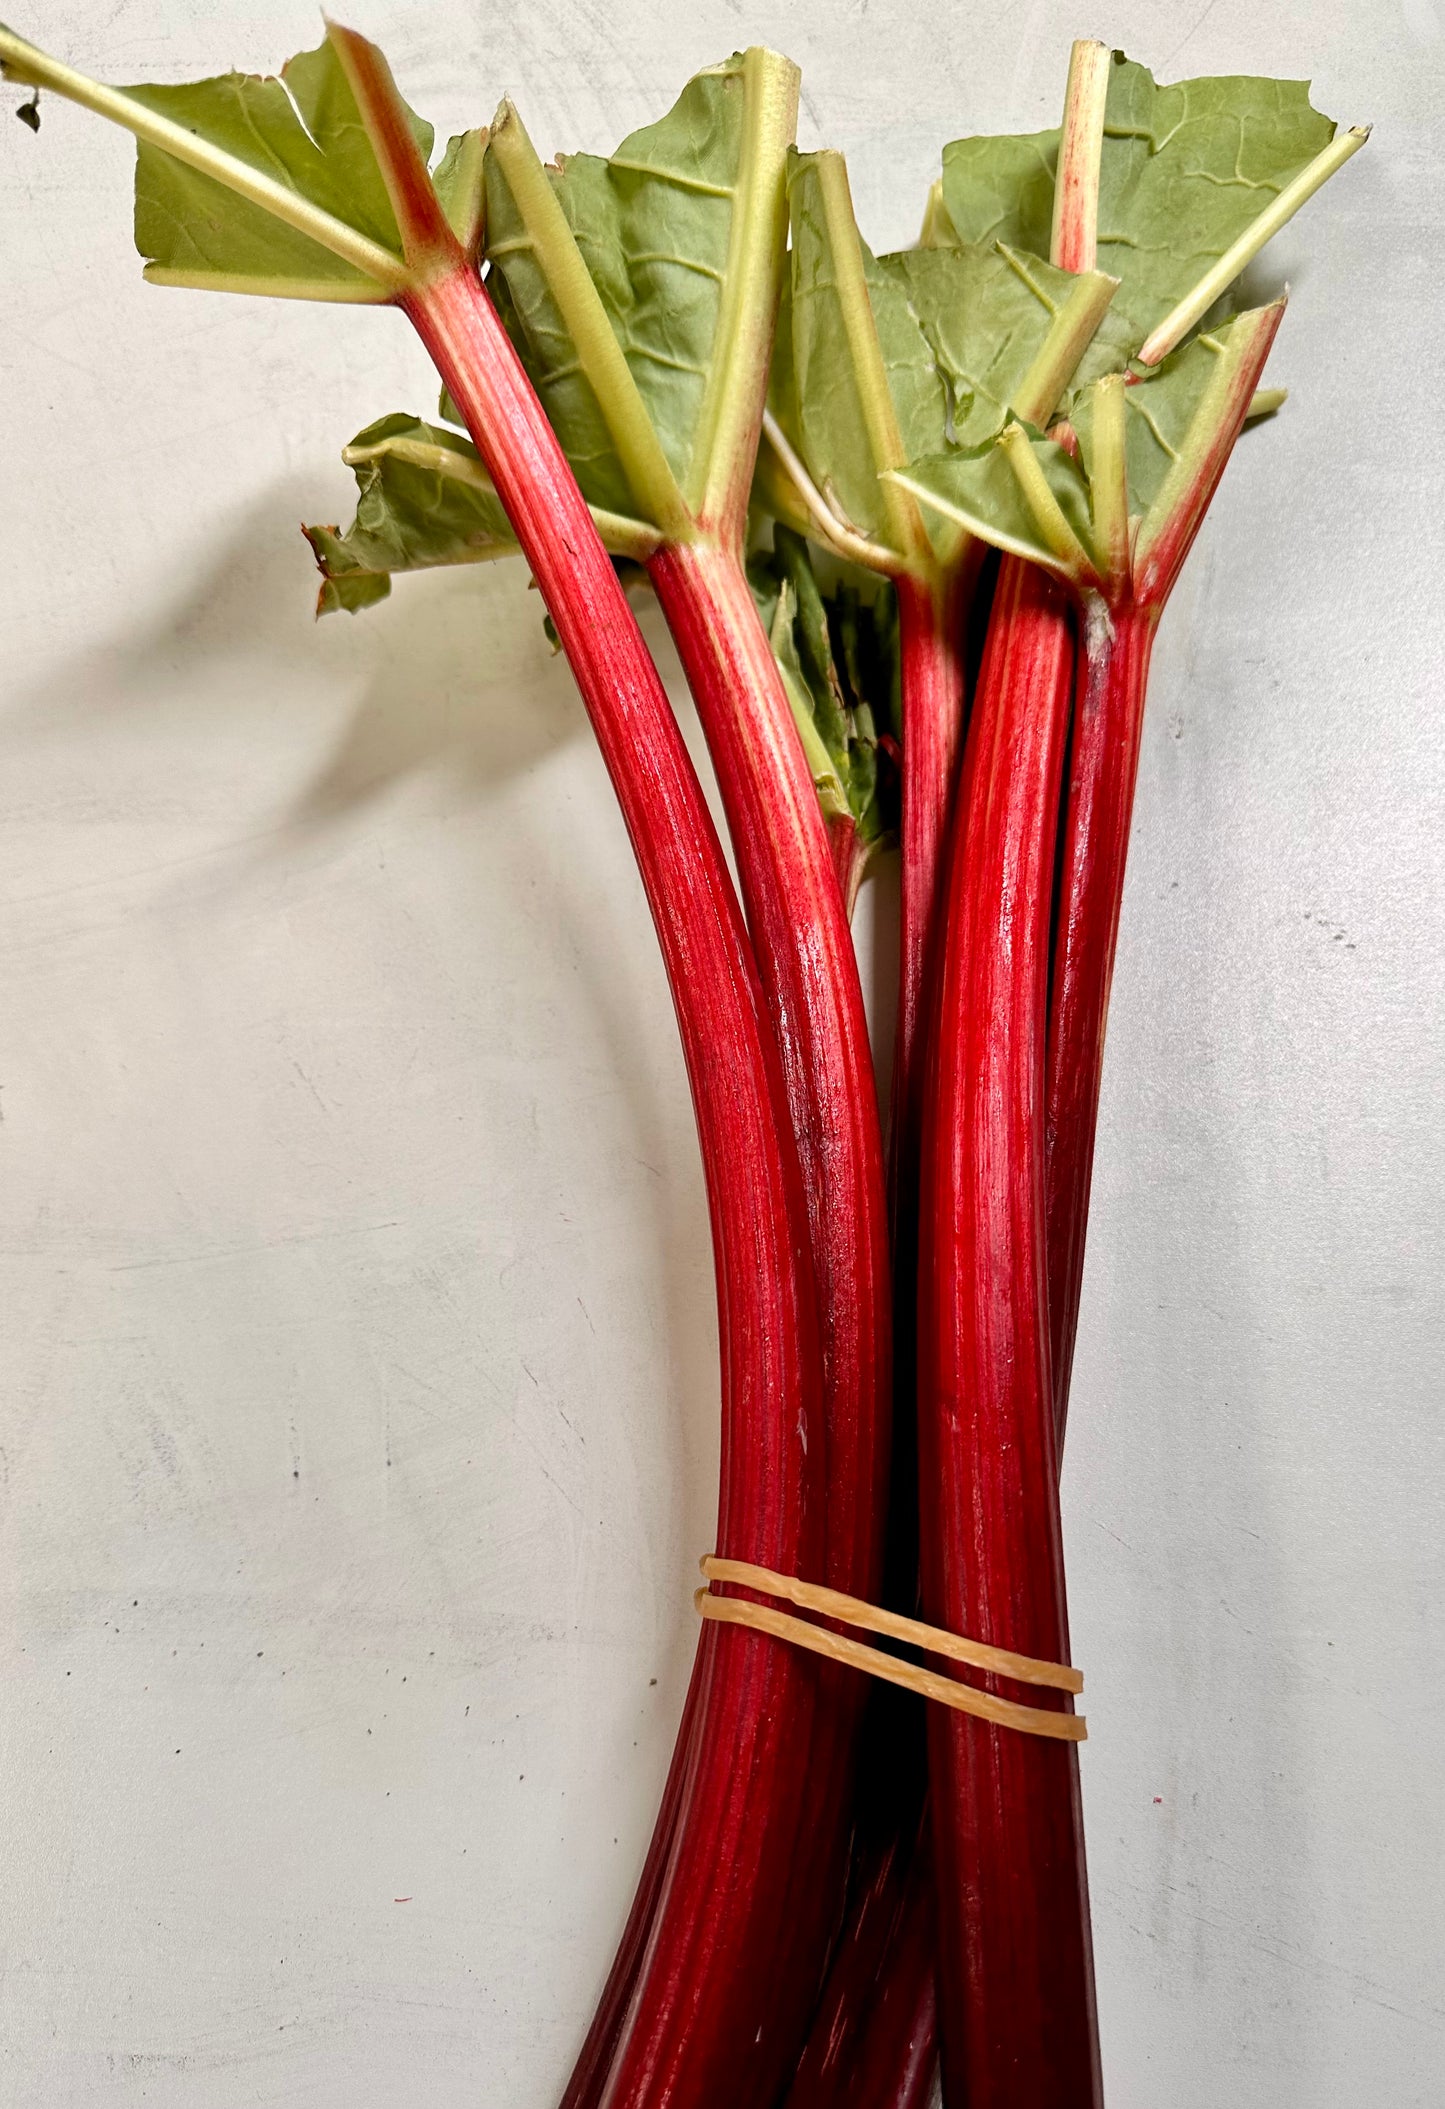 RHUBARB - Lovely bunches